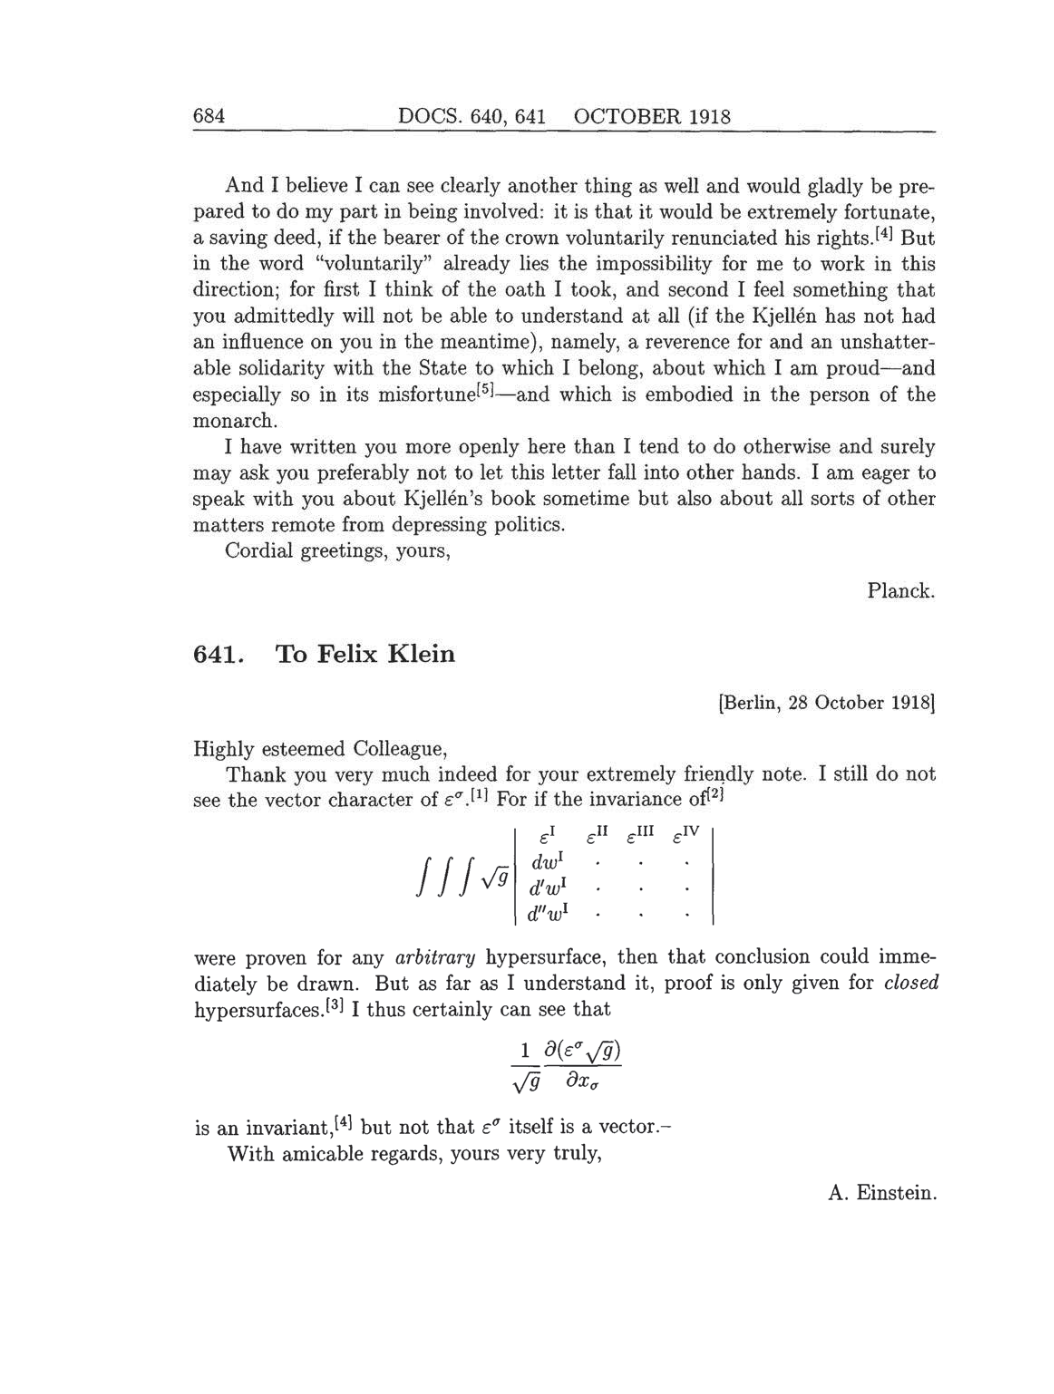 Volume 8: The Berlin Years: Correspondence, 1914-1918 (English translation supplement) page 684